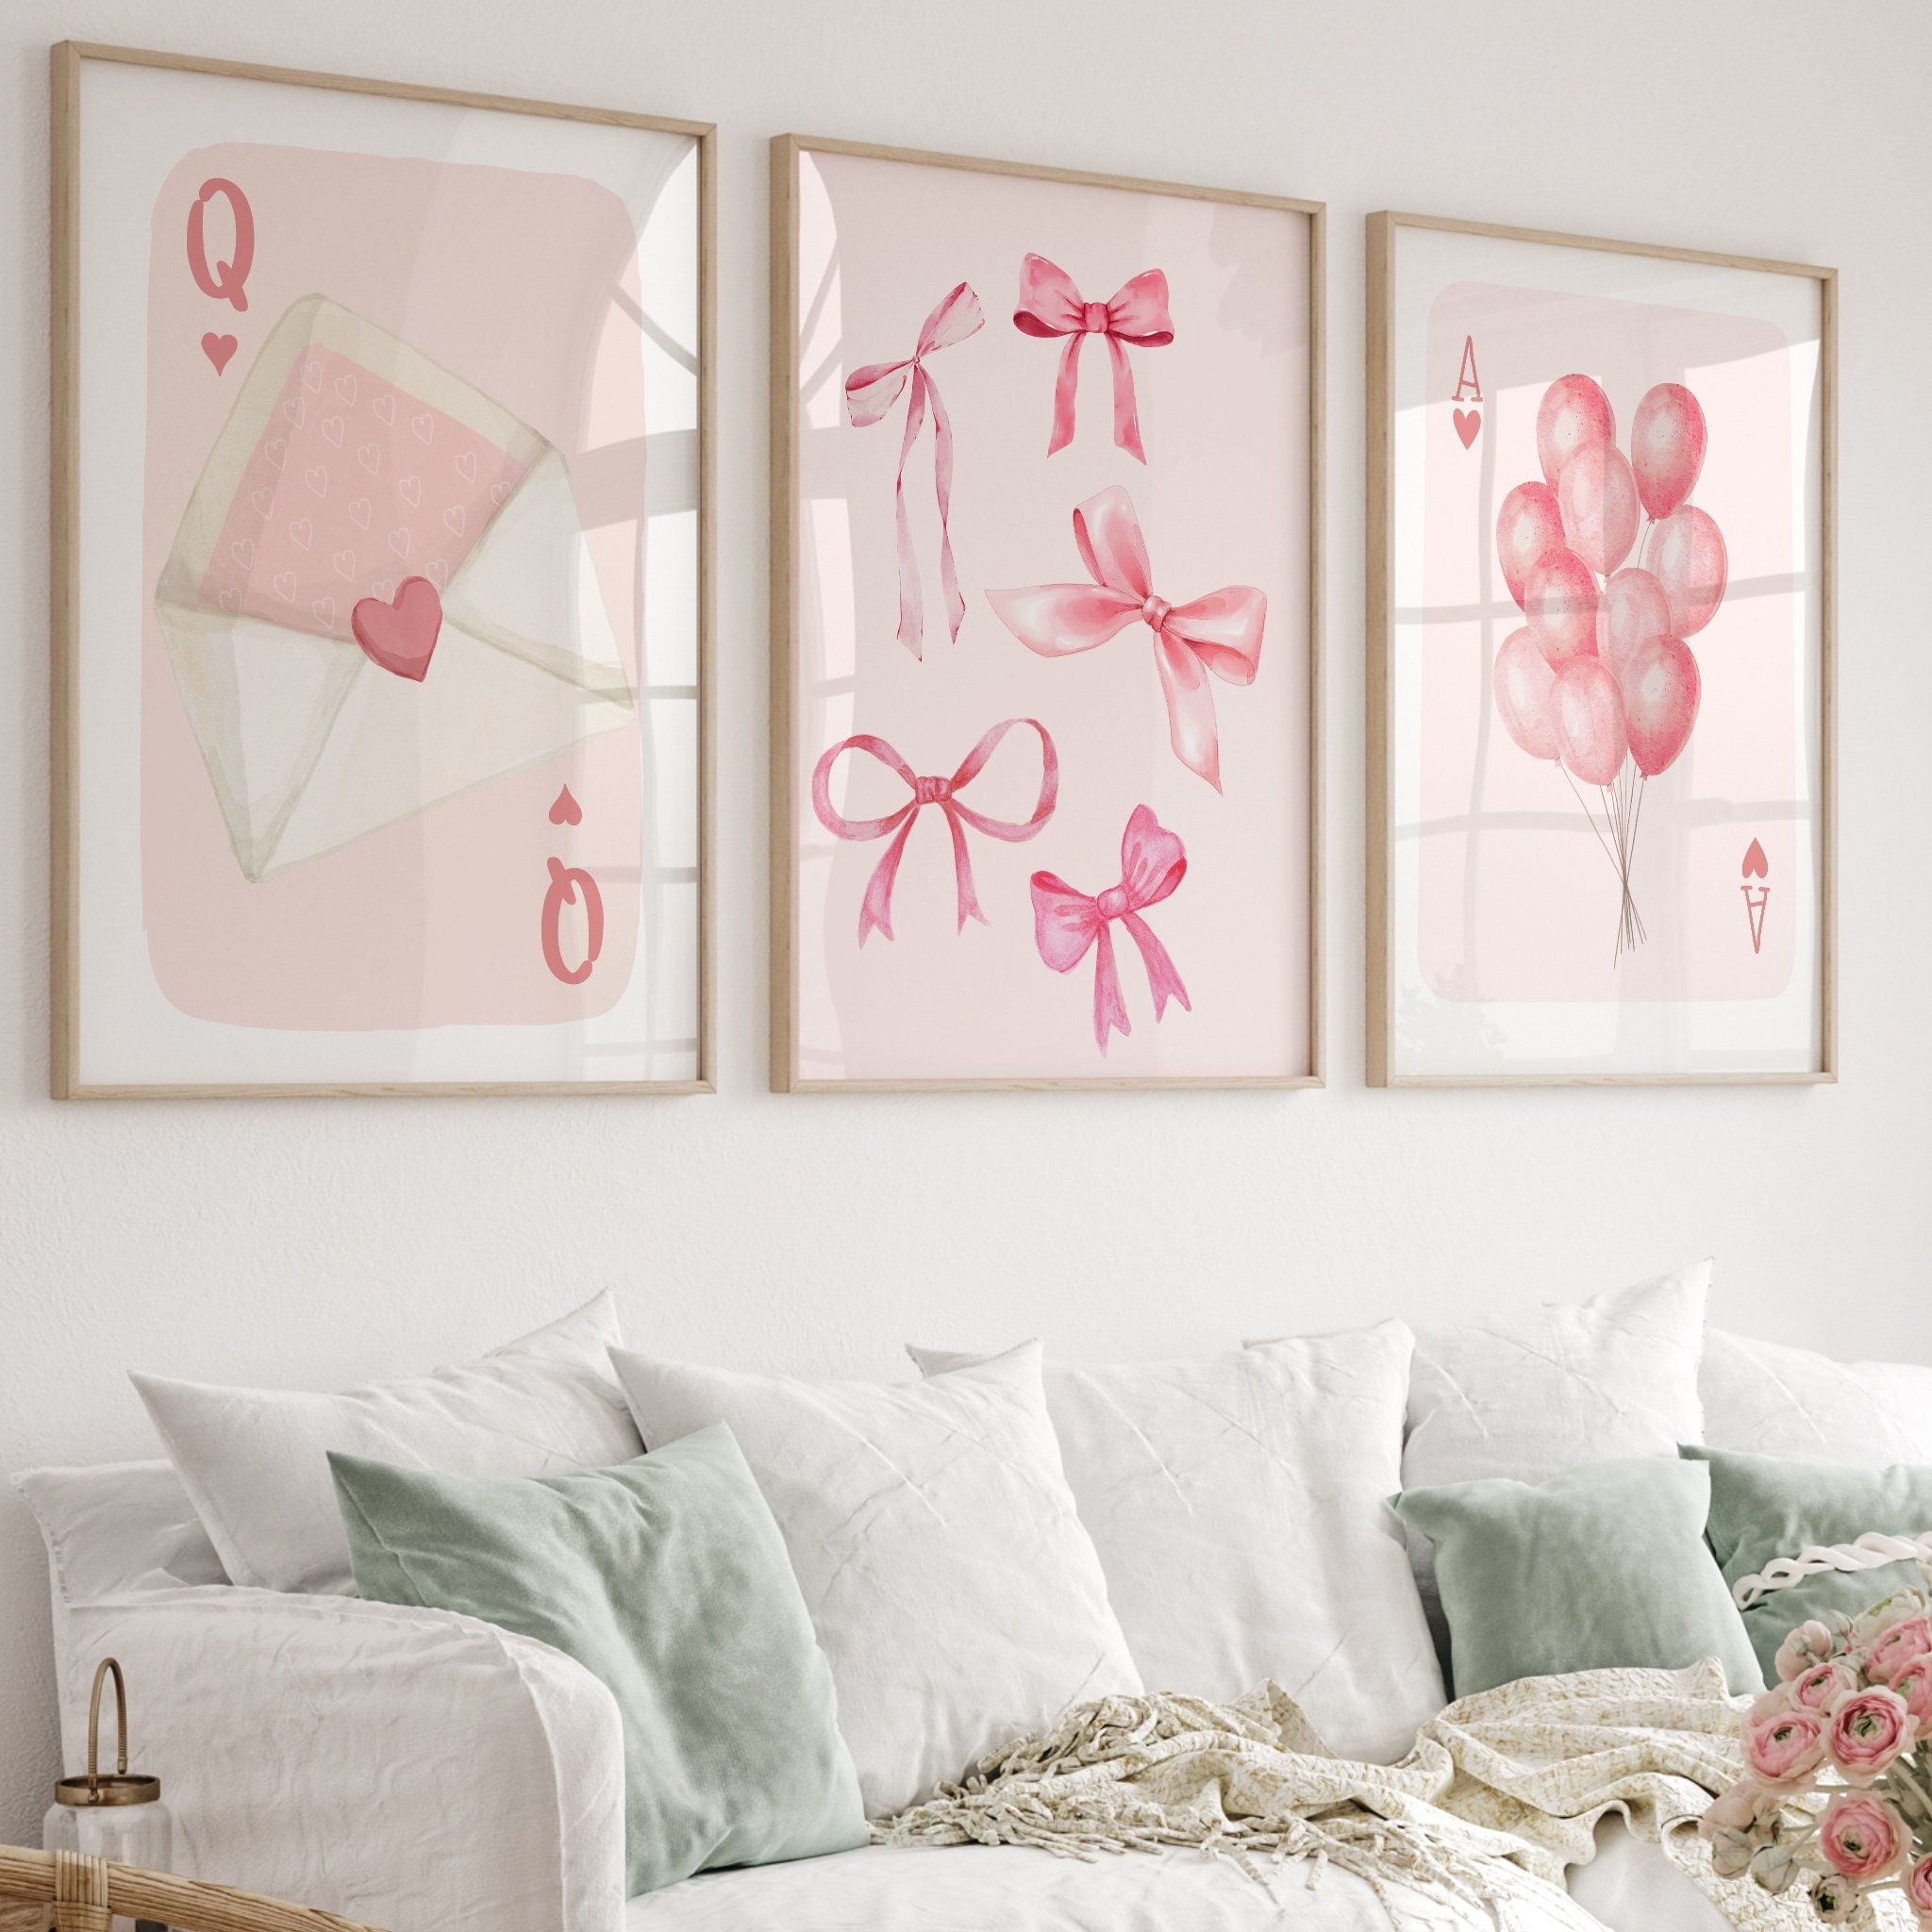 Coquette Aesthetic, Wall Collage Kit Coquette Room Decor, Soft Girl,  Princess, Fairycore, Poster Prints, College Apartment Printables -   Canada